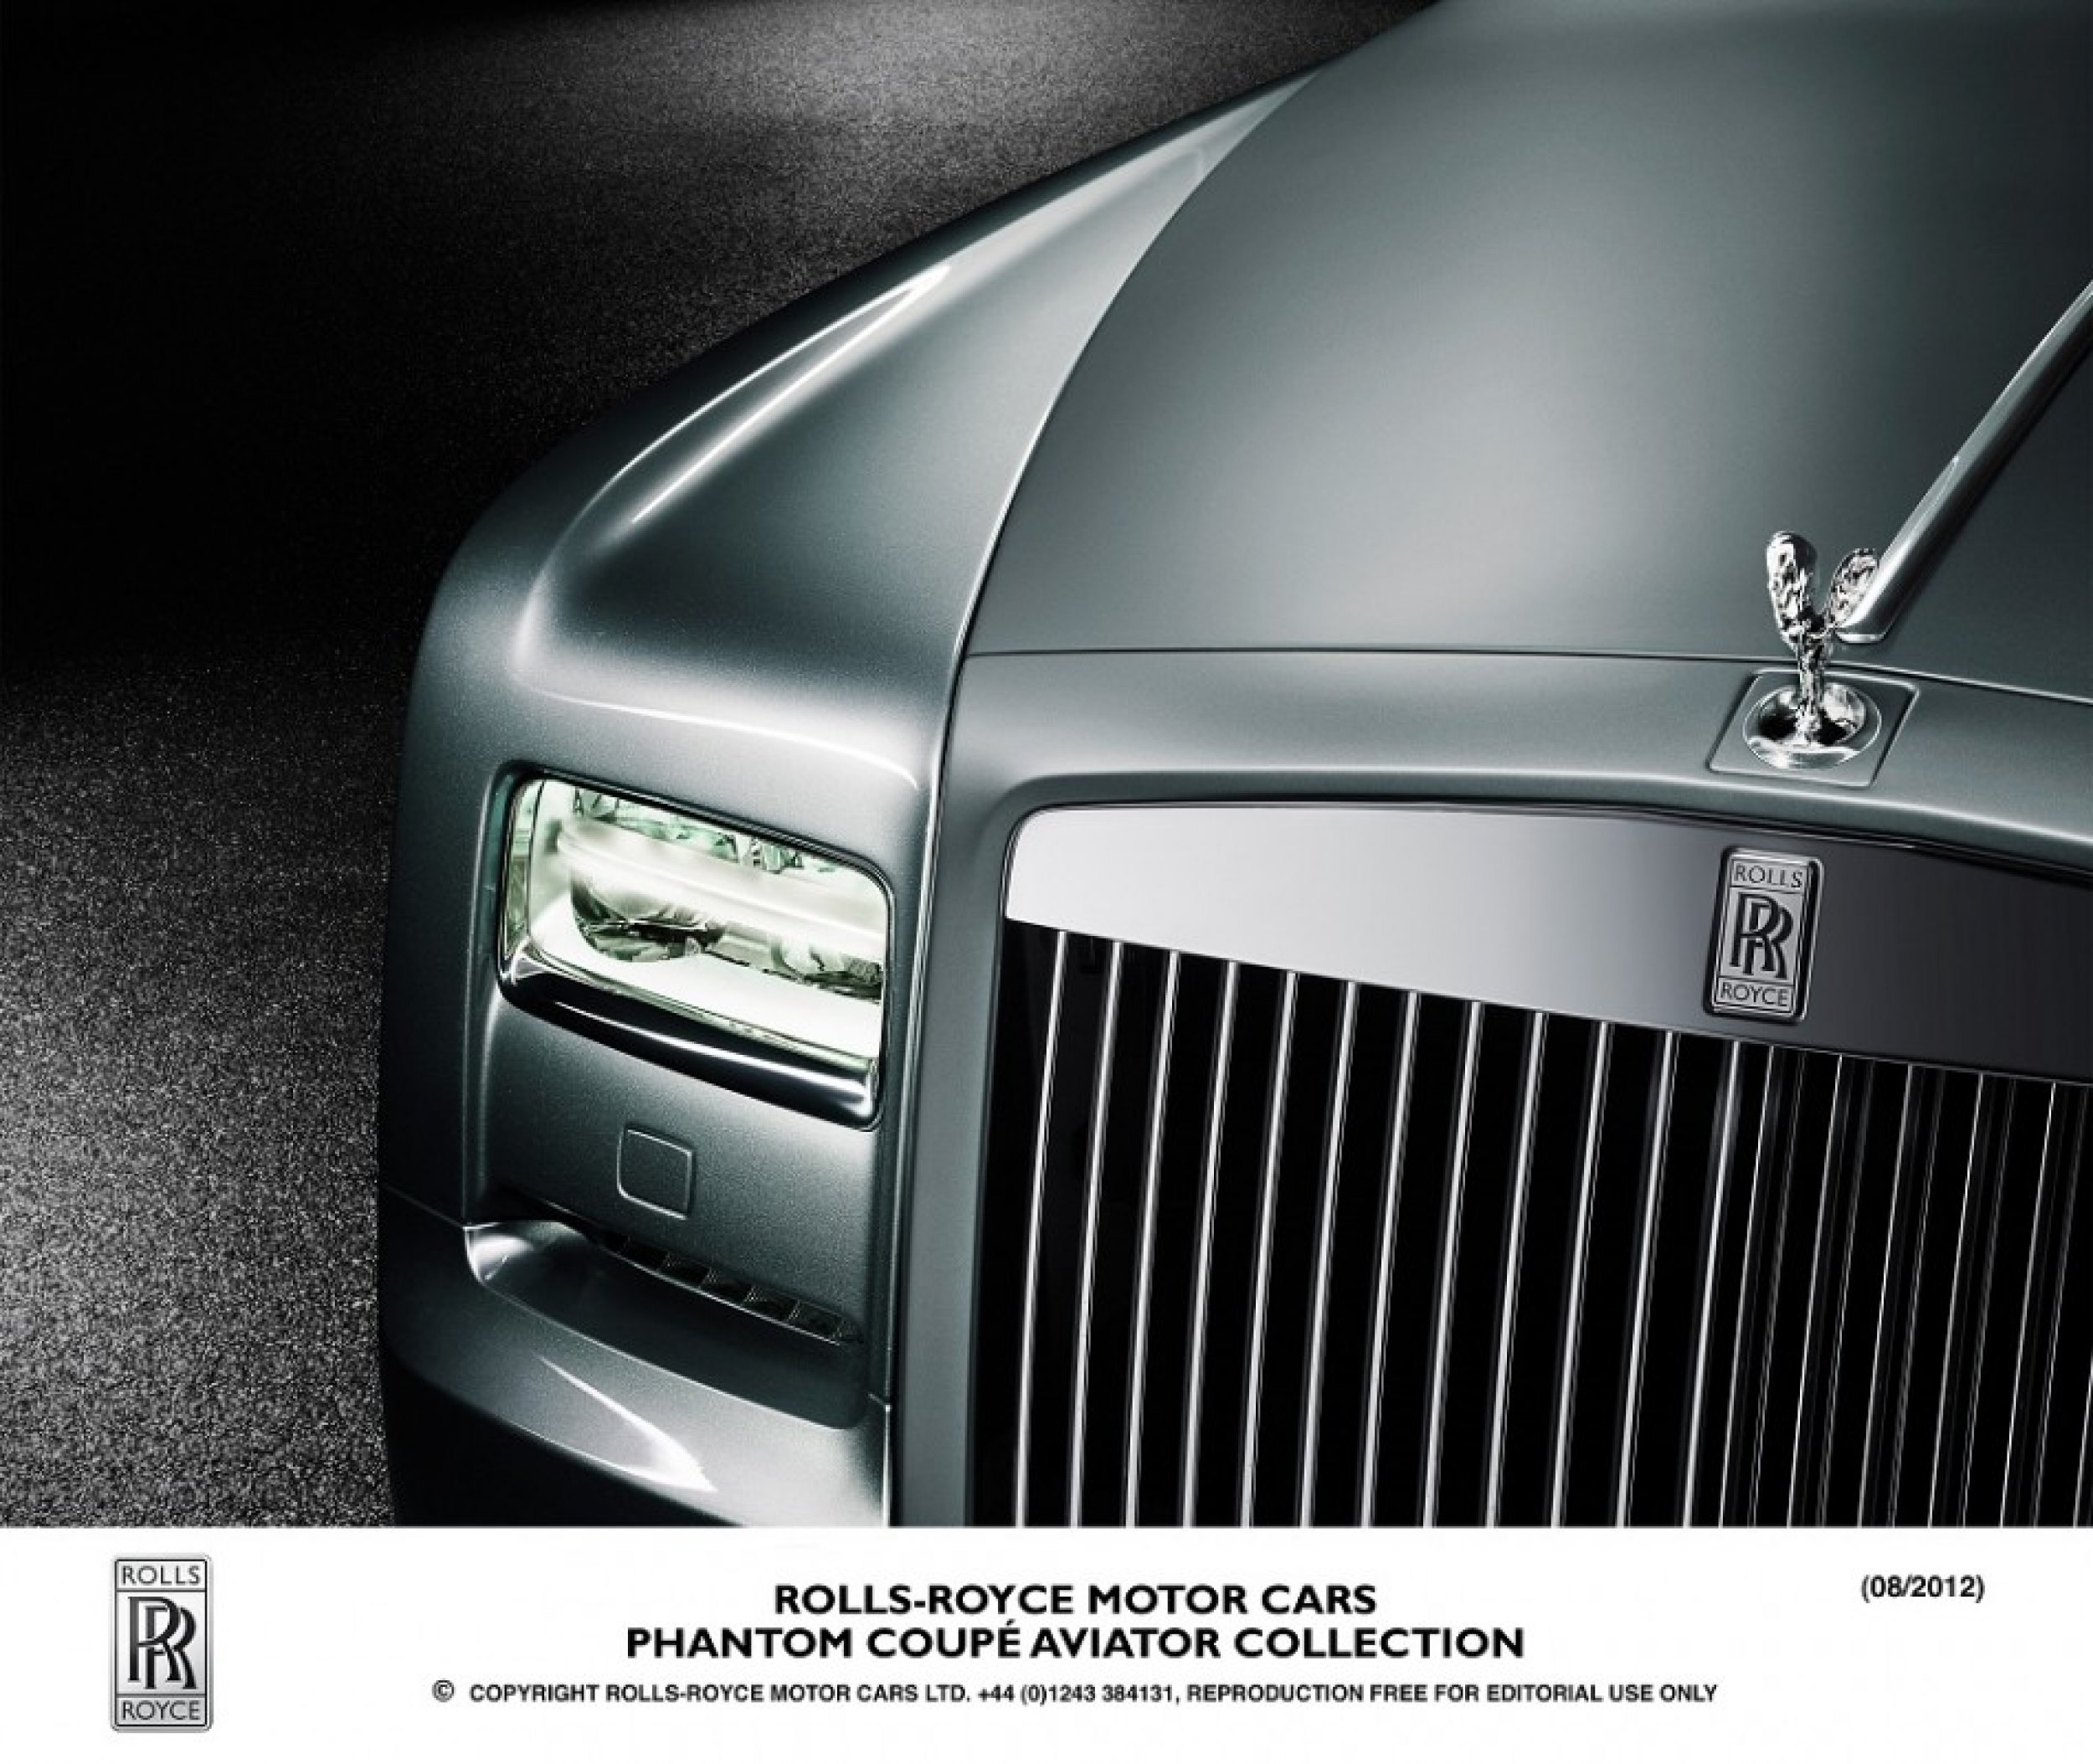 The grill on the new Rolls-Royce Phantom Coupe Aviator.